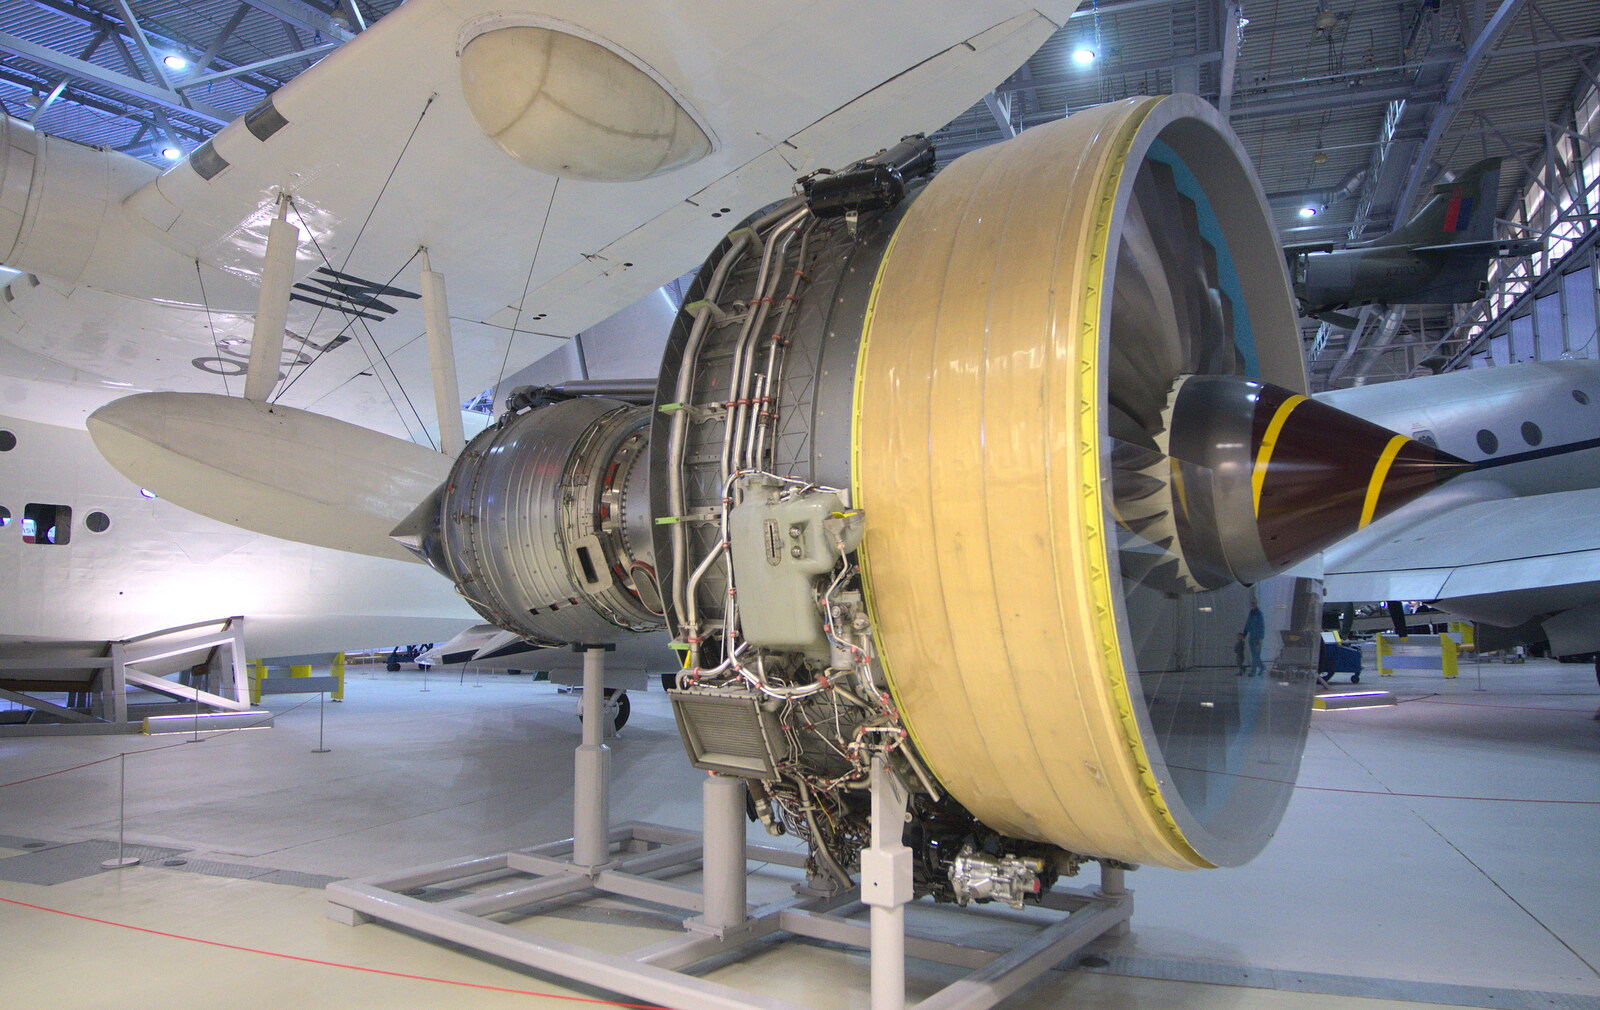 A Rolls-Royce Trent engine from A Day Out at Duxford, Cambridgeshire - 9th March 2014